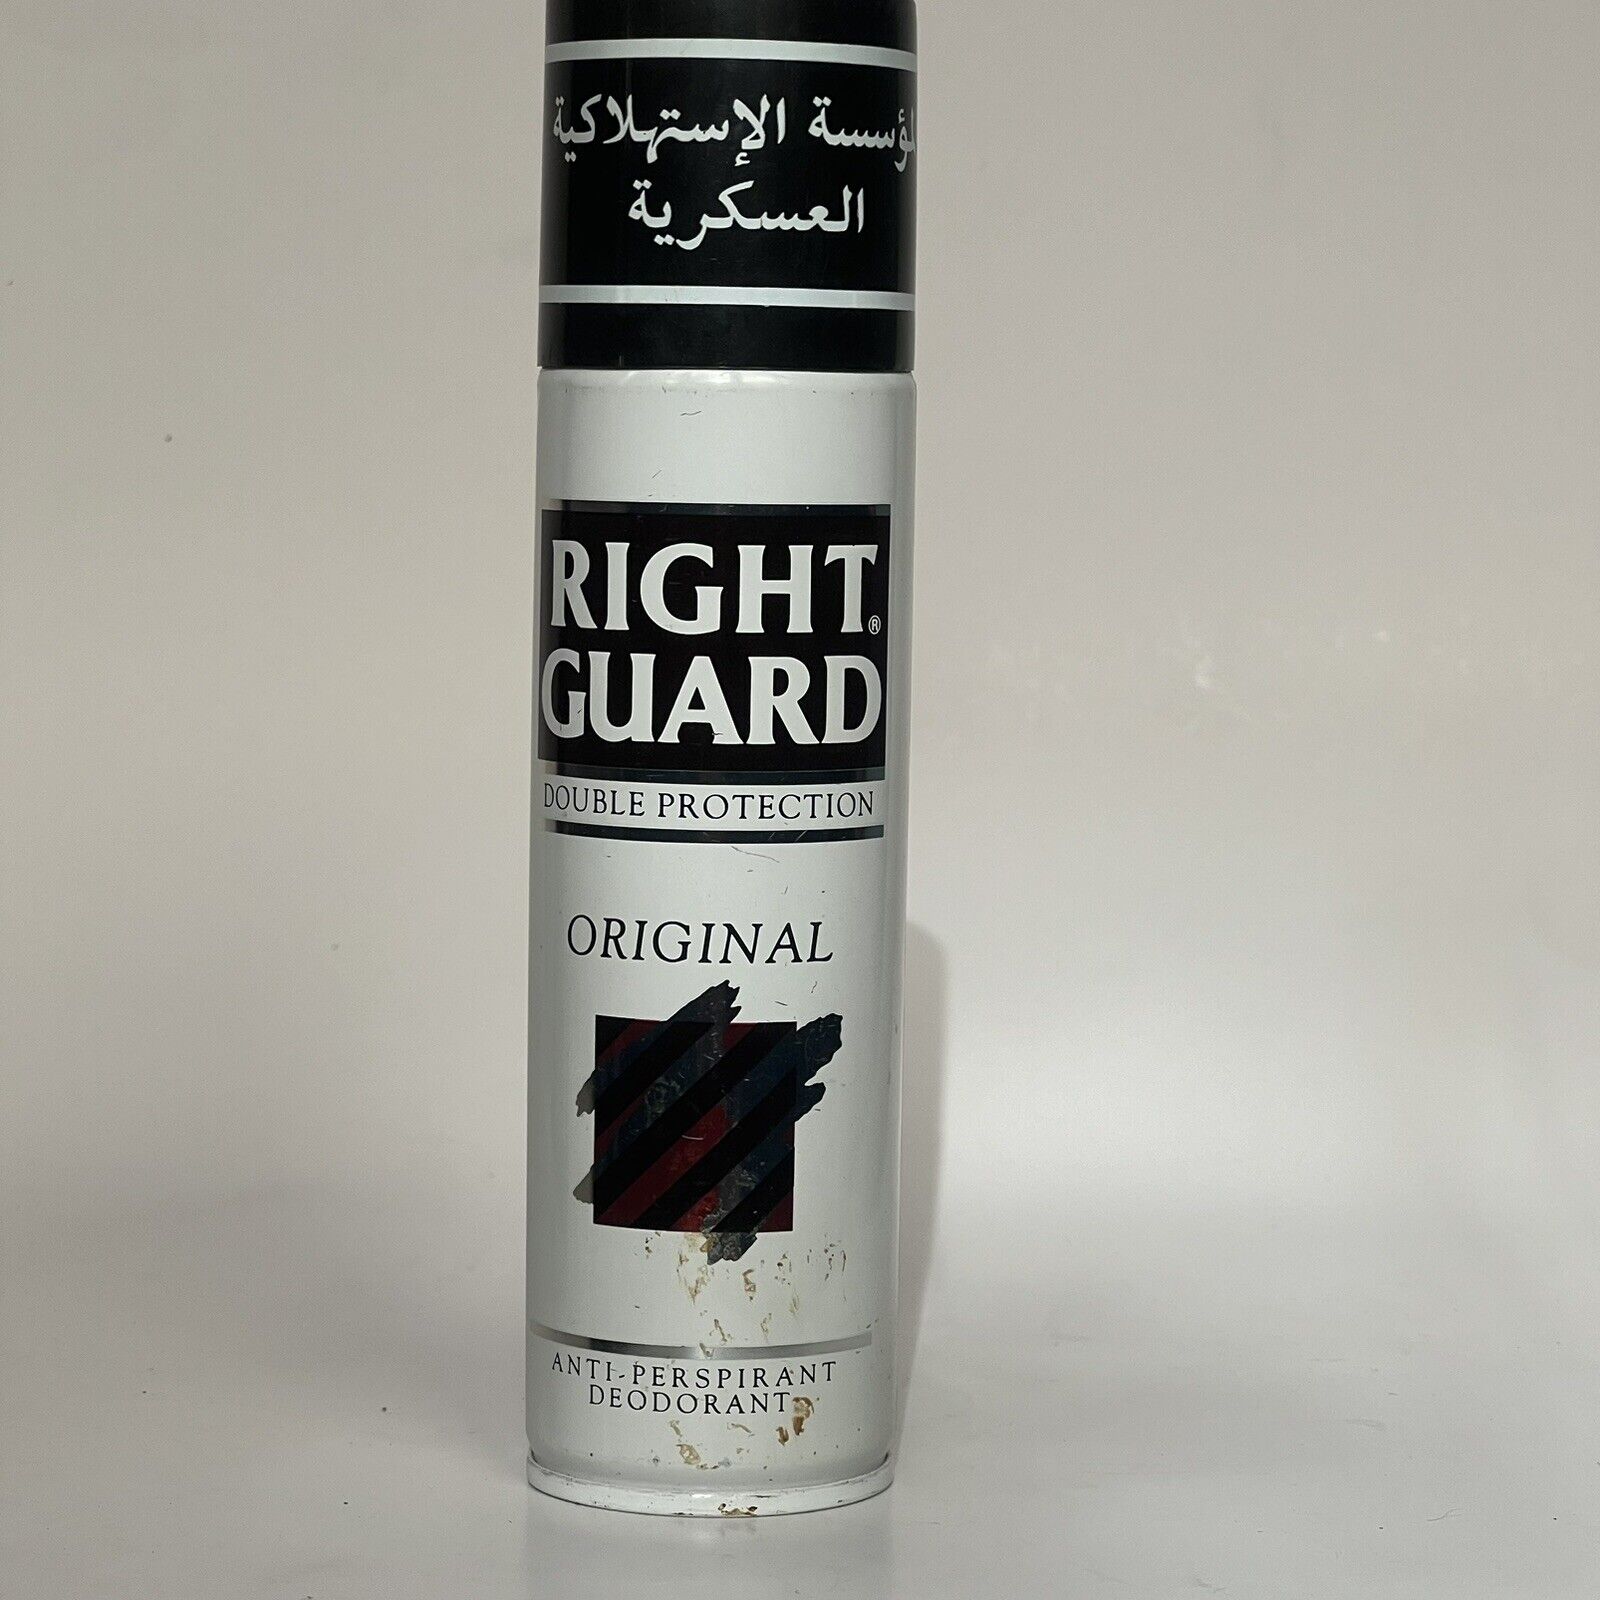 Vintage Gillette Right Guard Double Protection Deodorant Spray 150ml Spray Can